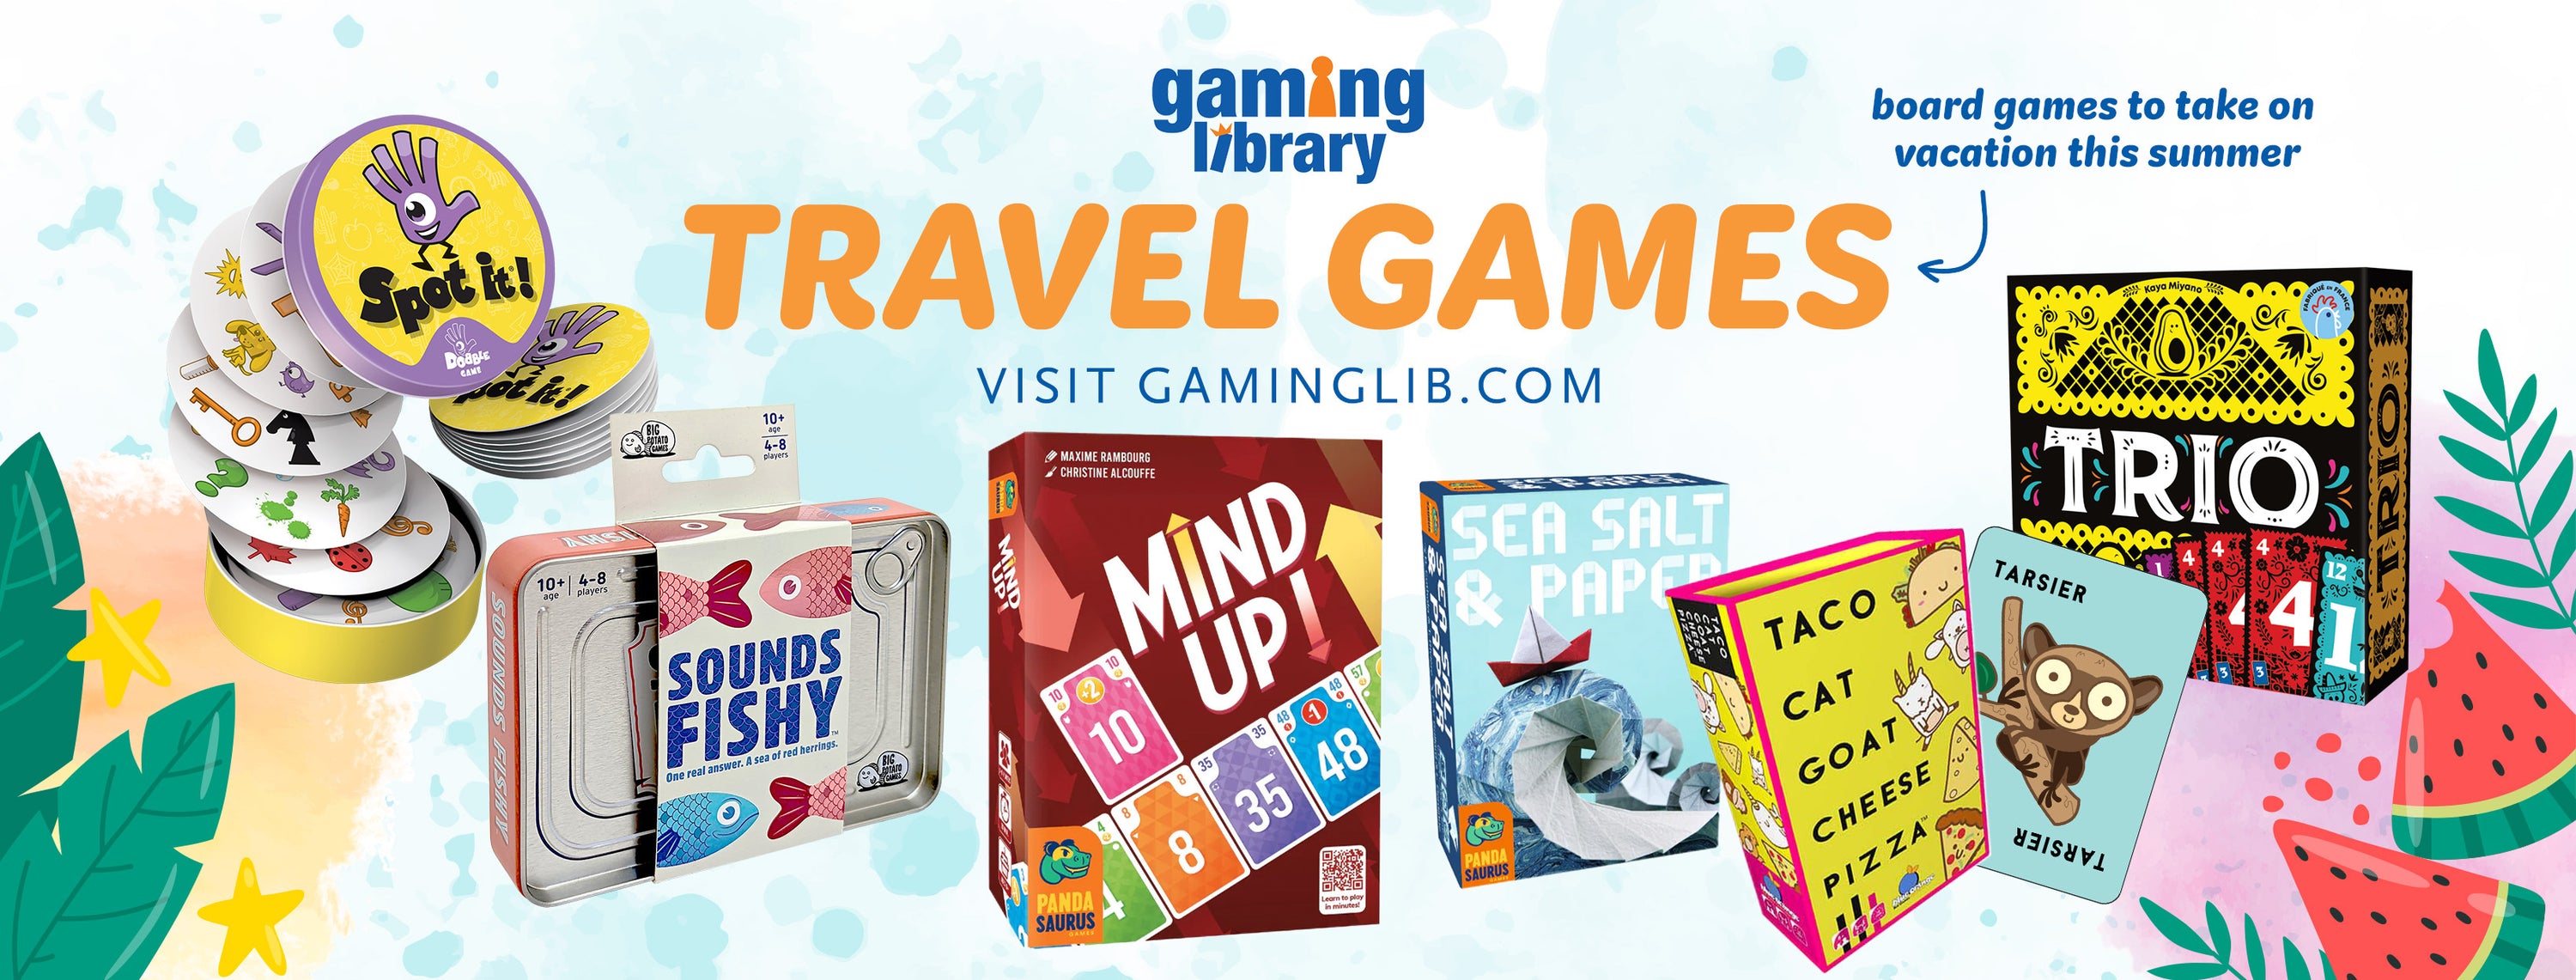 Travel Games Collection of Gaming Library